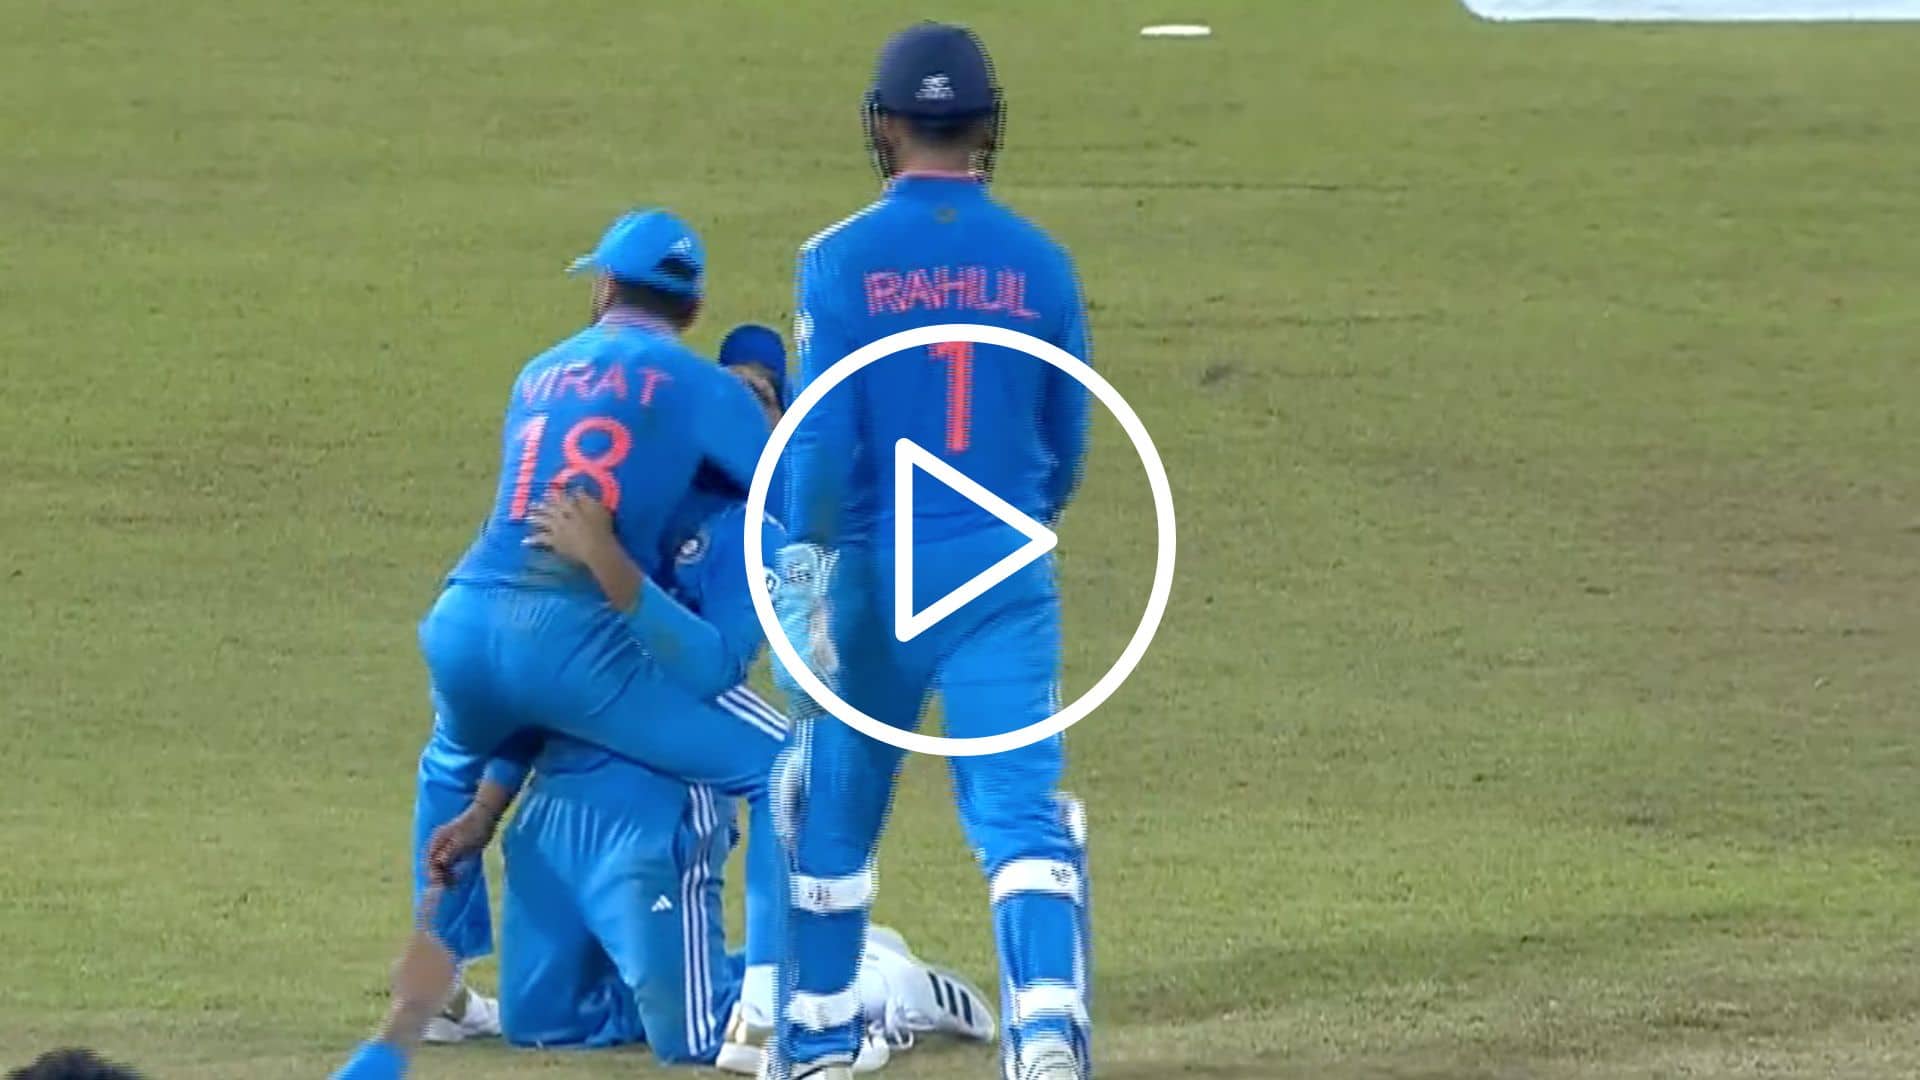 [Watch] Virat Kohli's Memorable Hug To Rohit Sharma After A Game-Changing Catch